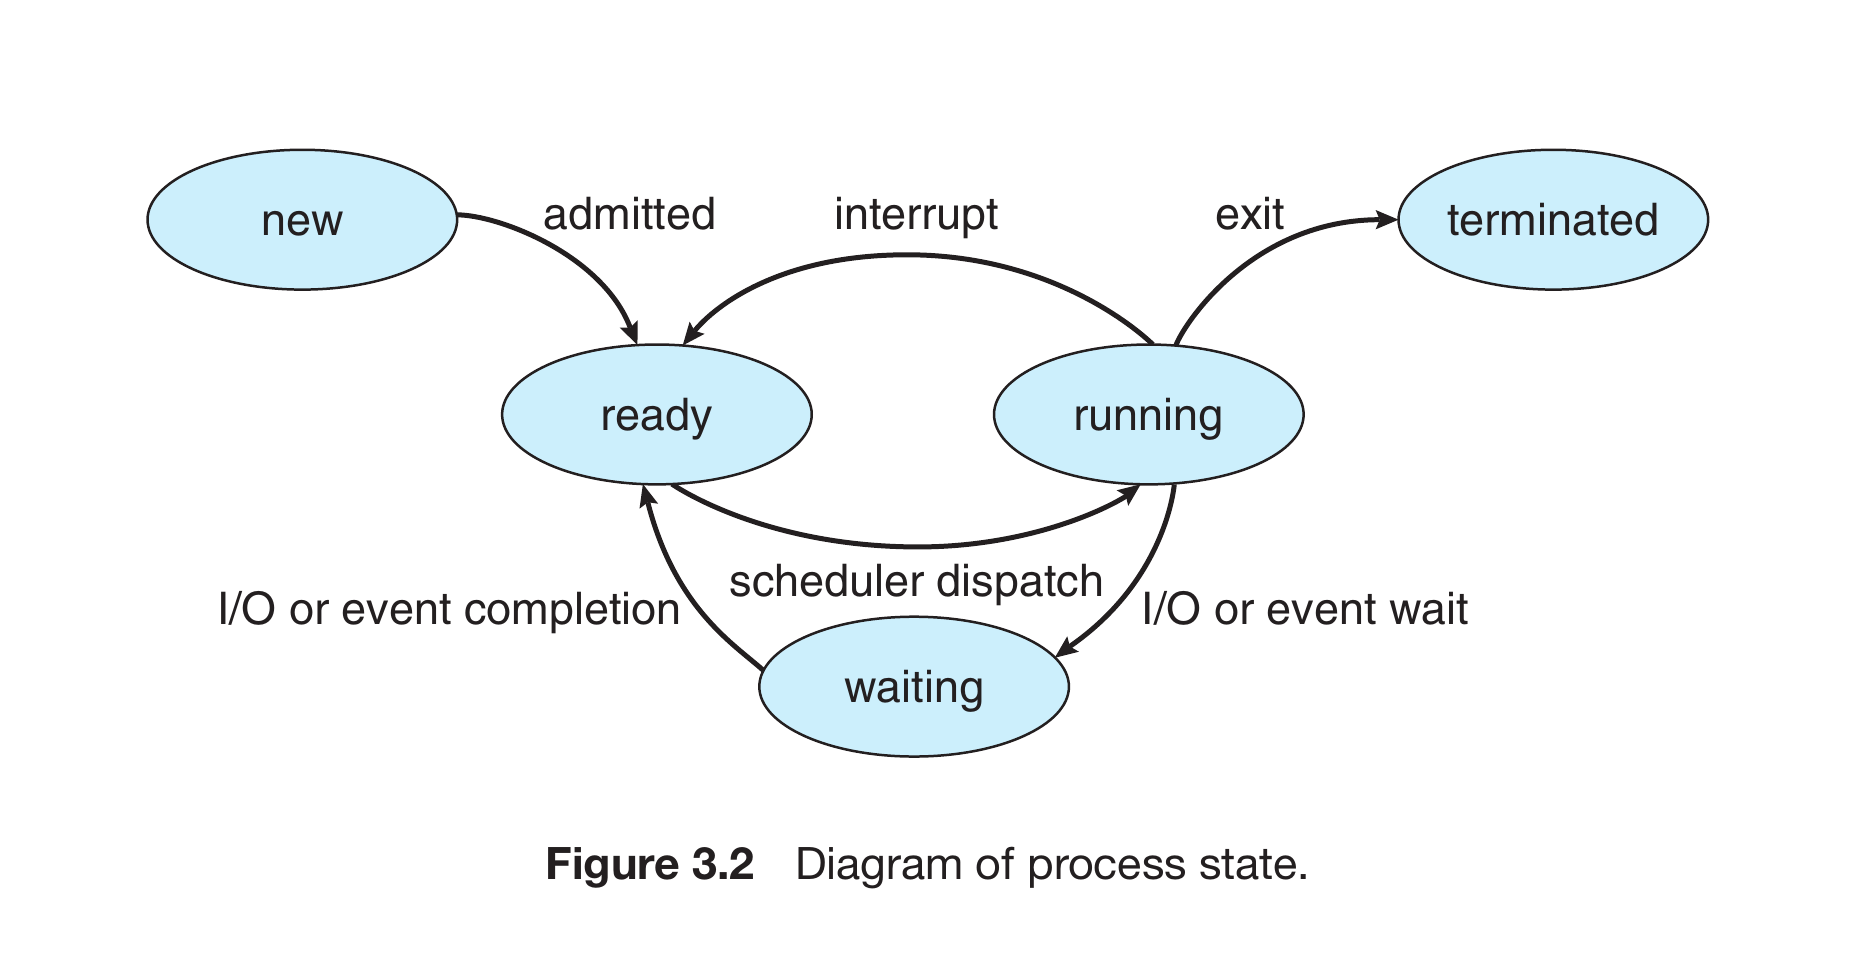 Figure 3.2 Diagram of process state.